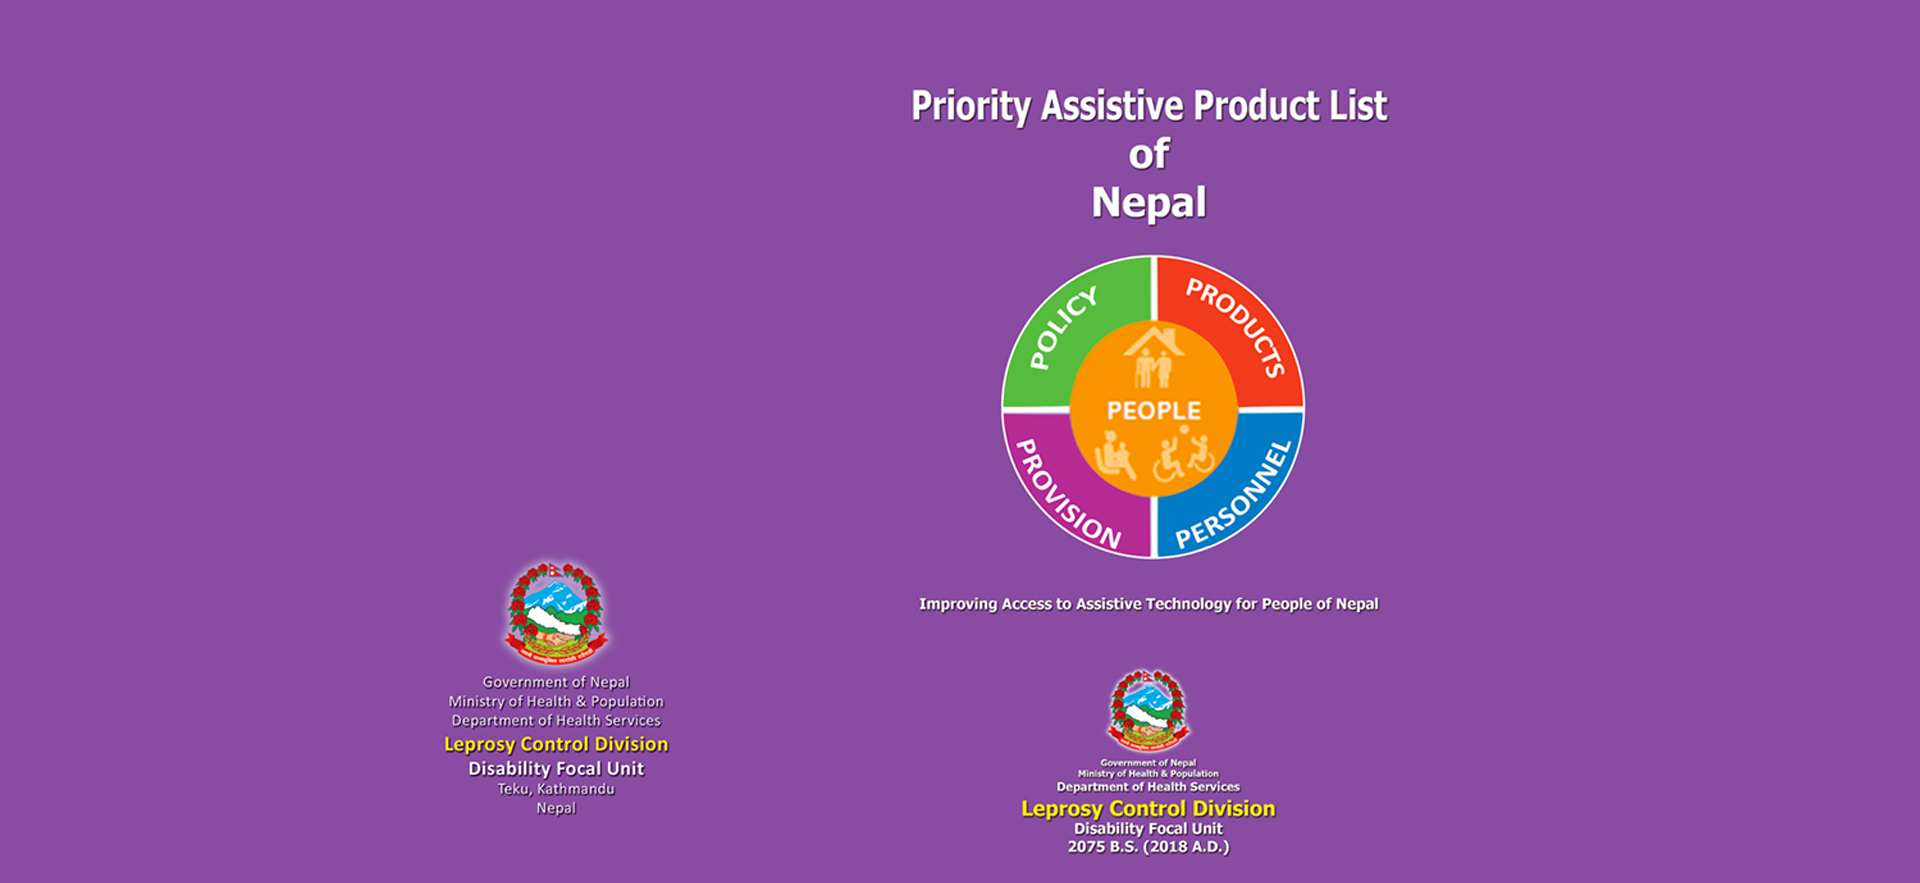 priority-assistive-product-list-of-nepal